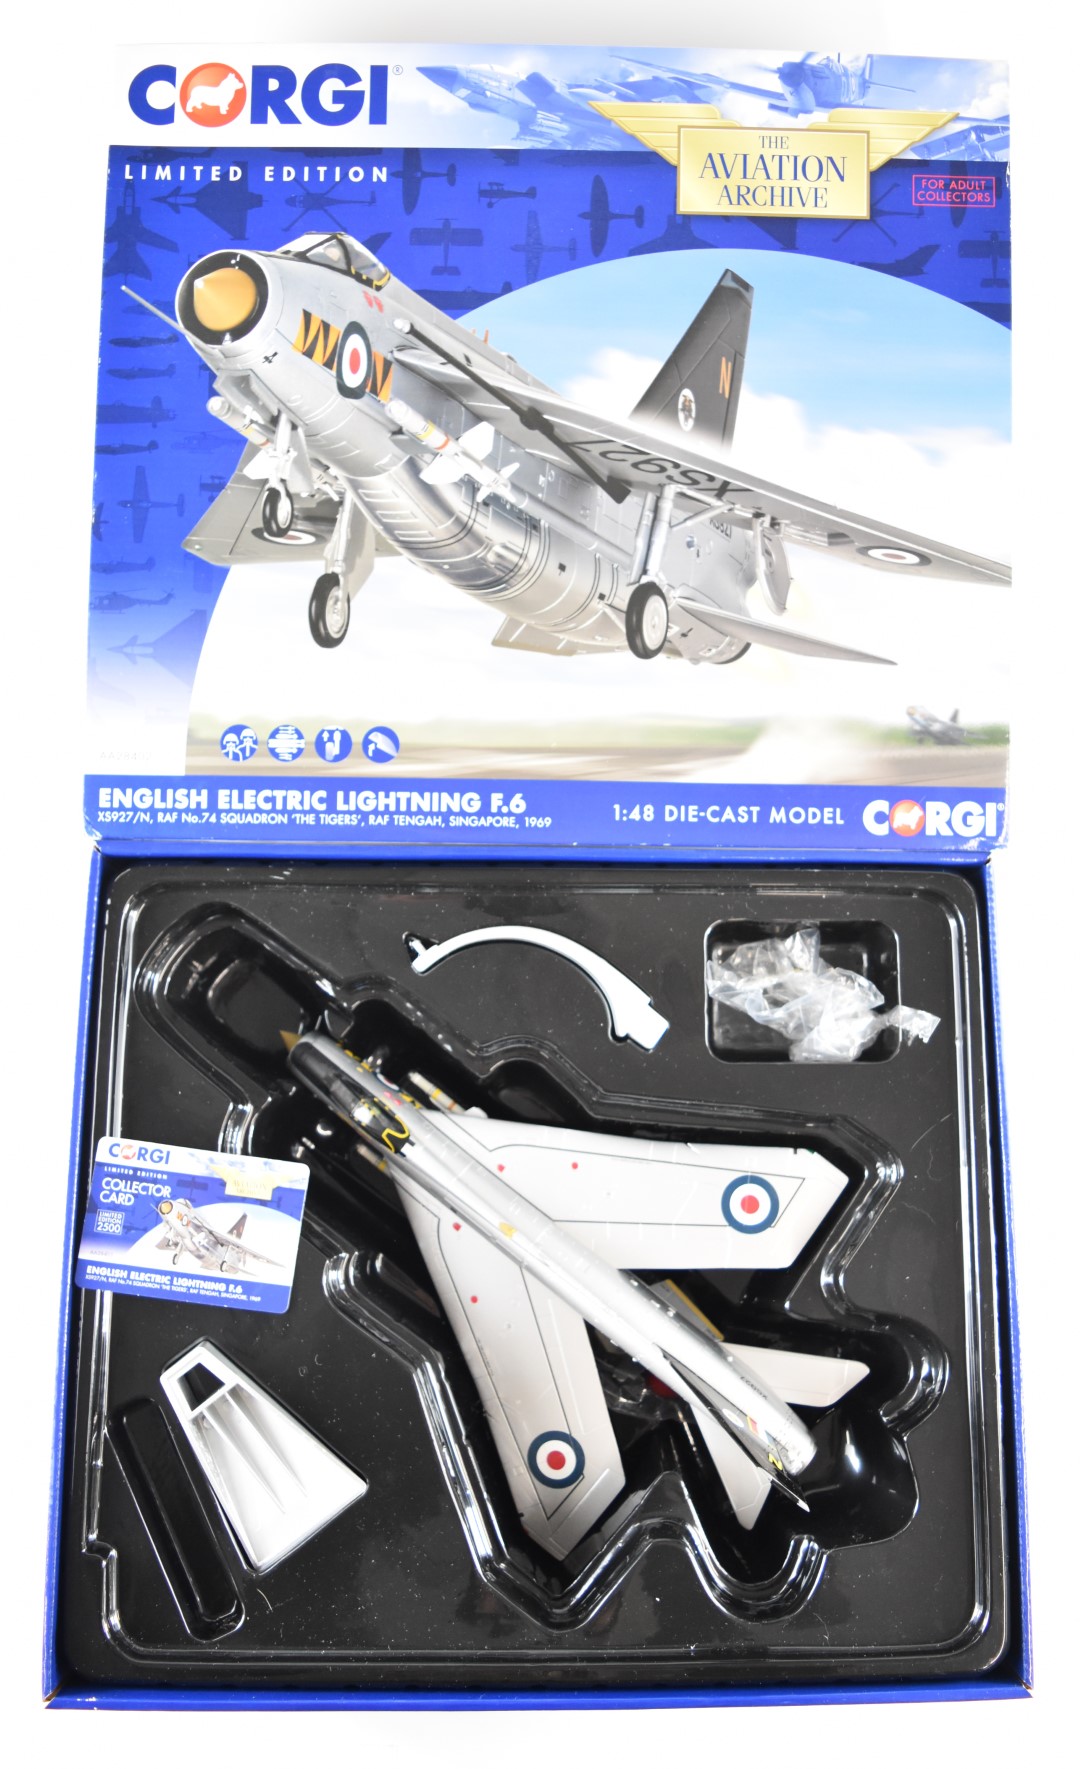 Corgi The Aviation Archive limited edition 1:48 scale diecast model English Electric Lightning F.